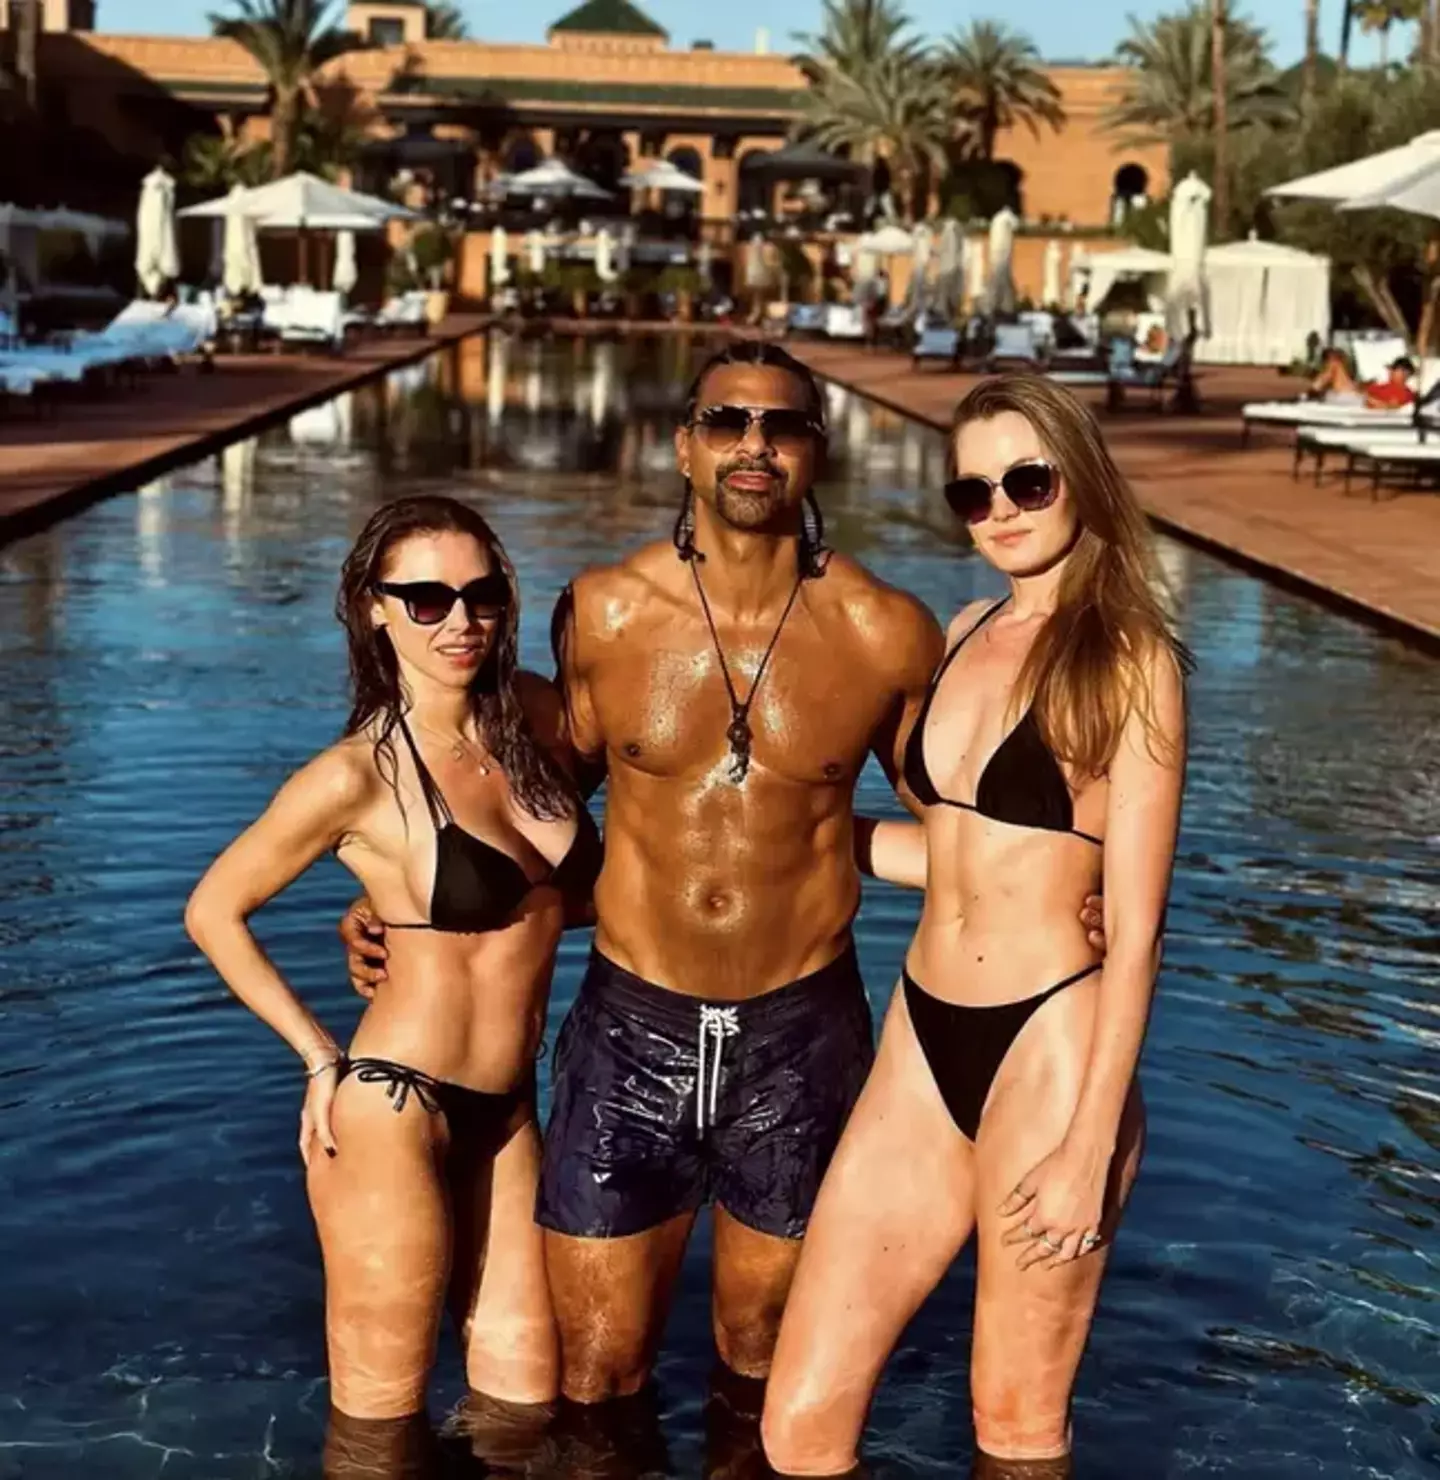 David Haye appeared to confirm the news that he's in a throuple.